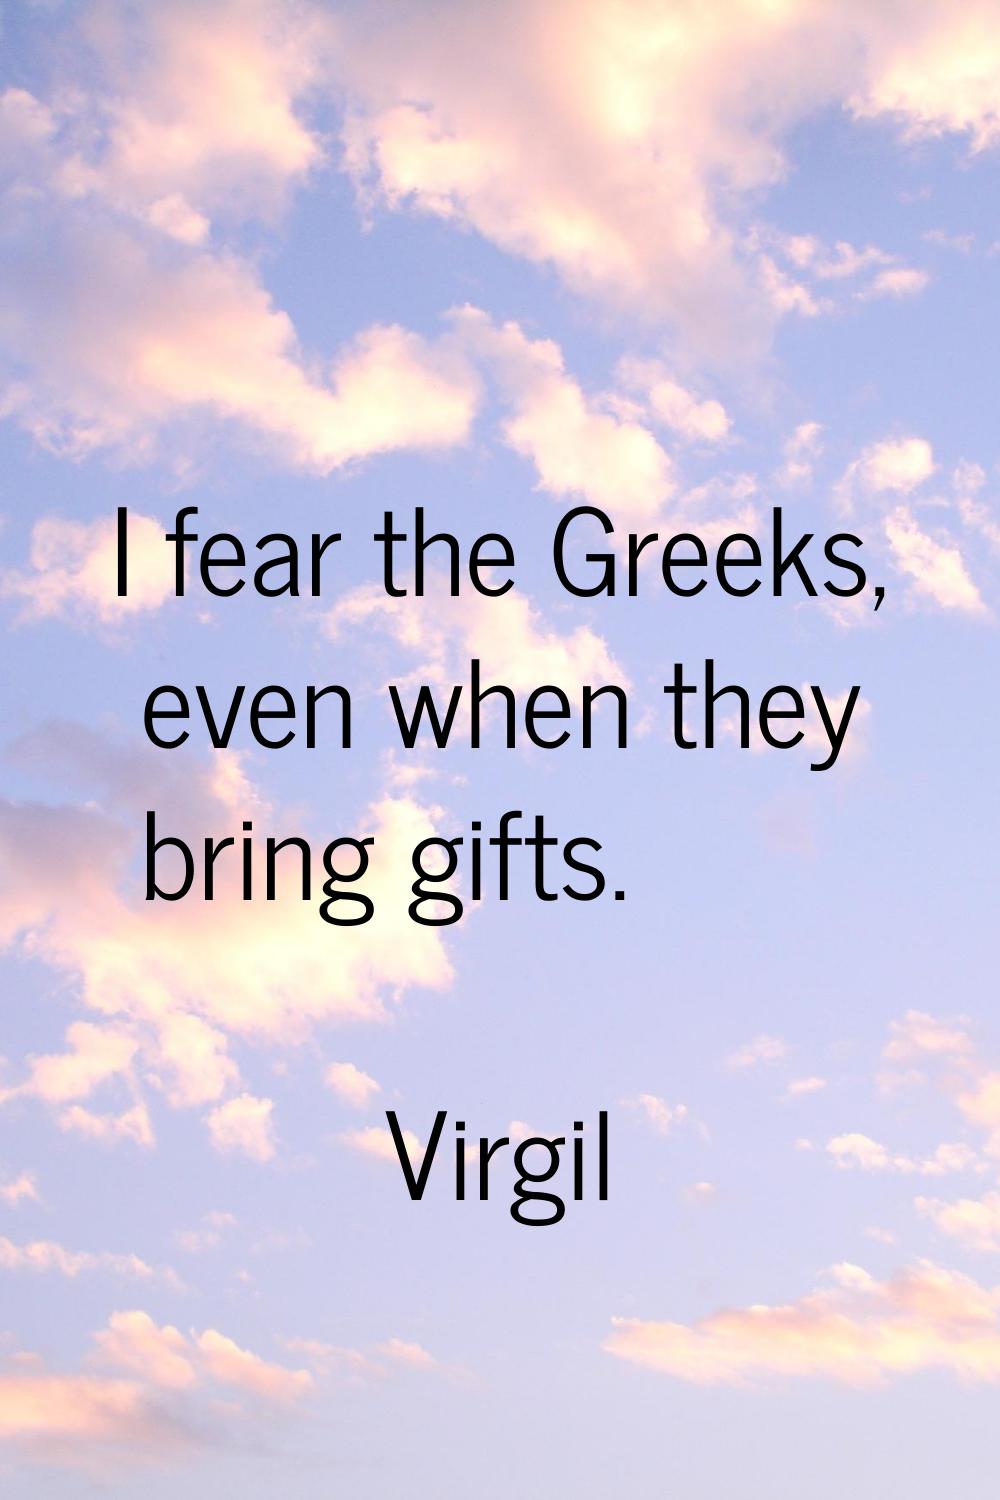 I fear the Greeks, even when they bring gifts.